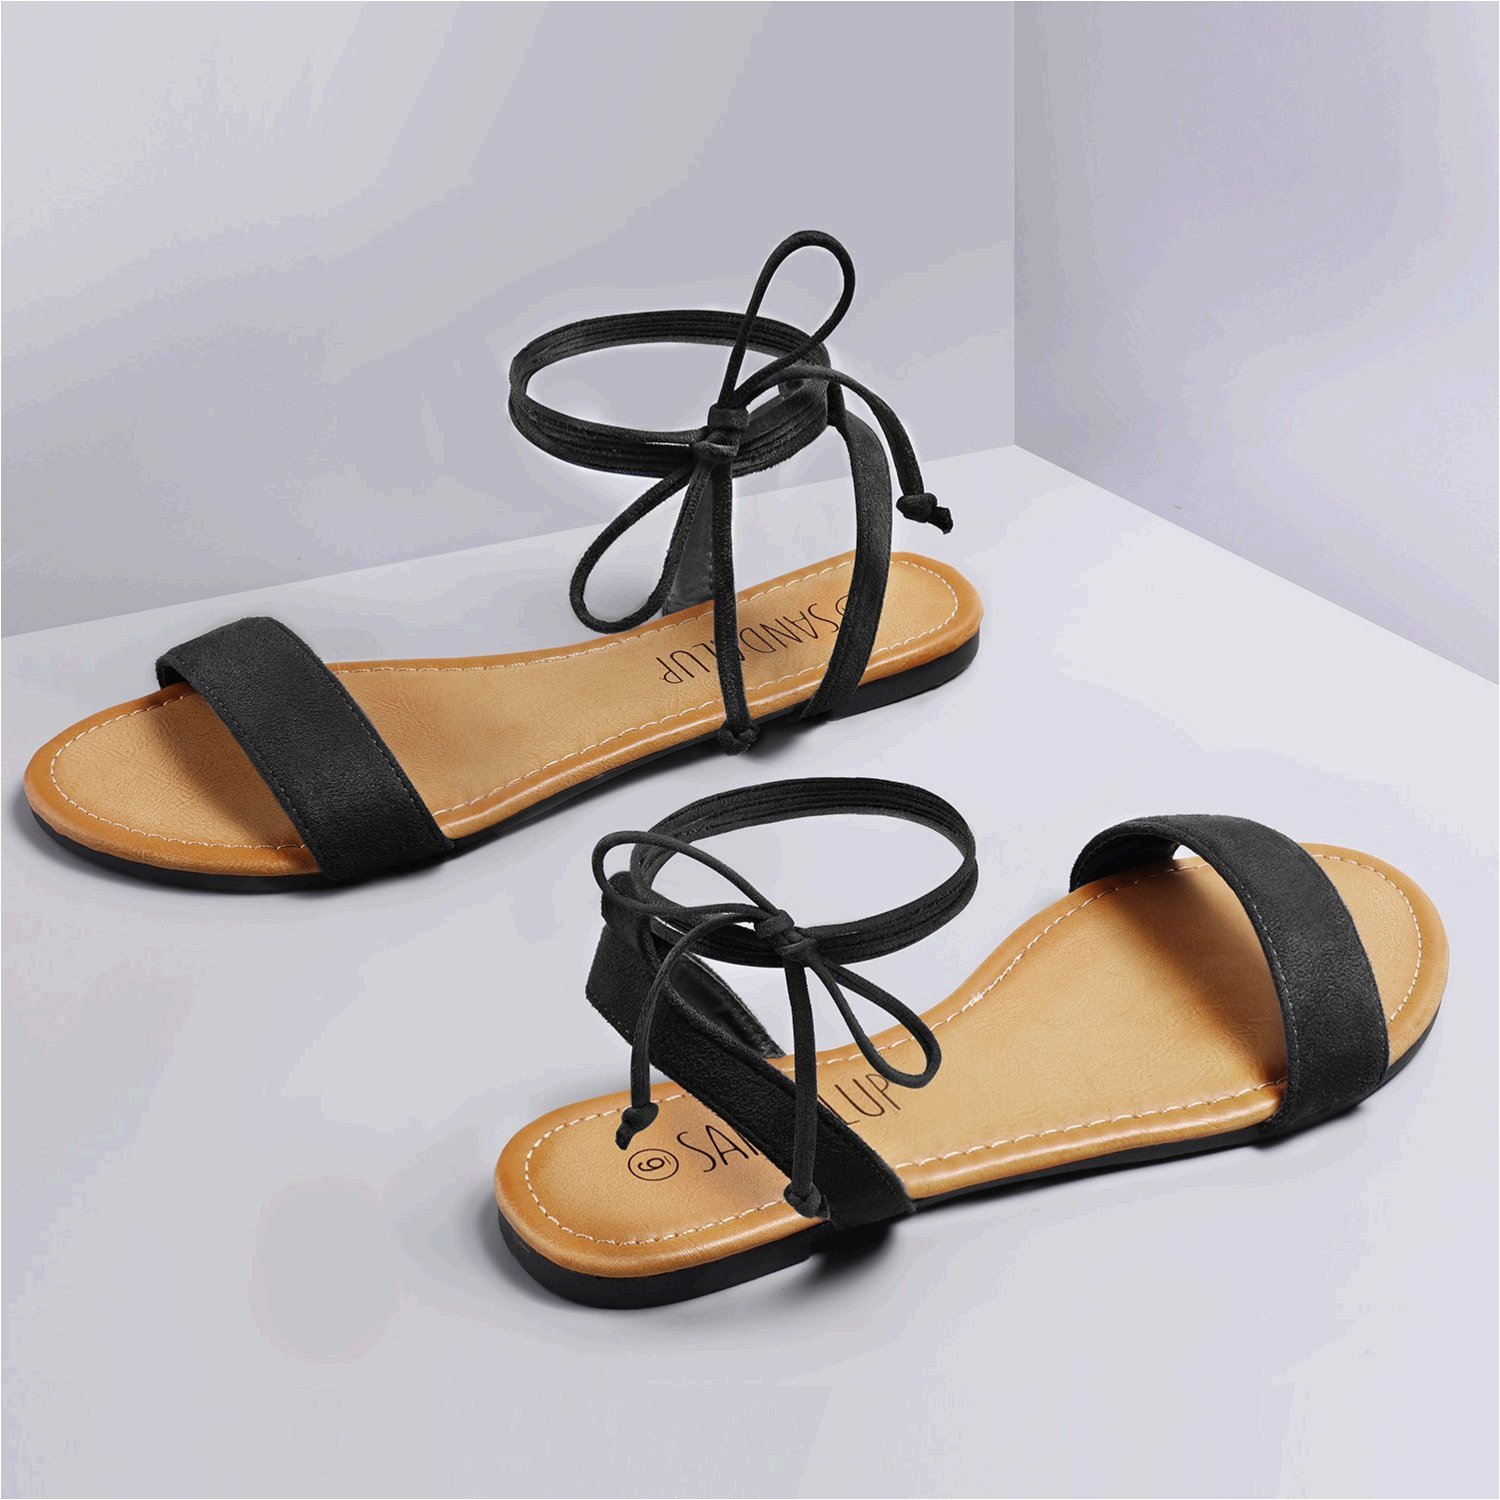 Sandalup Tie Up Ankle Strap Flat Sandals For Women New Black Size 5 0 Ebay